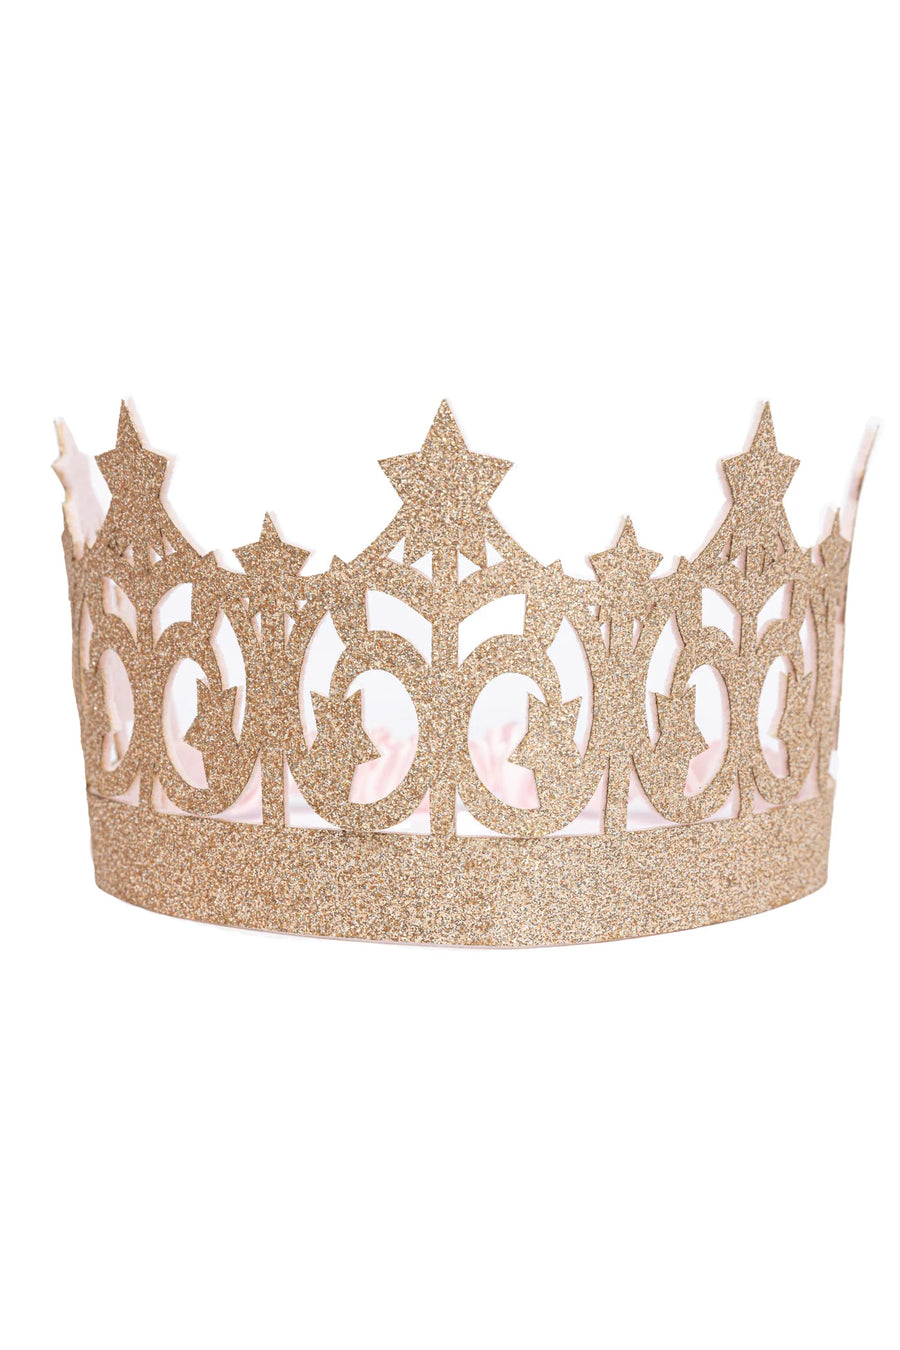 front view of gold glitter crown 